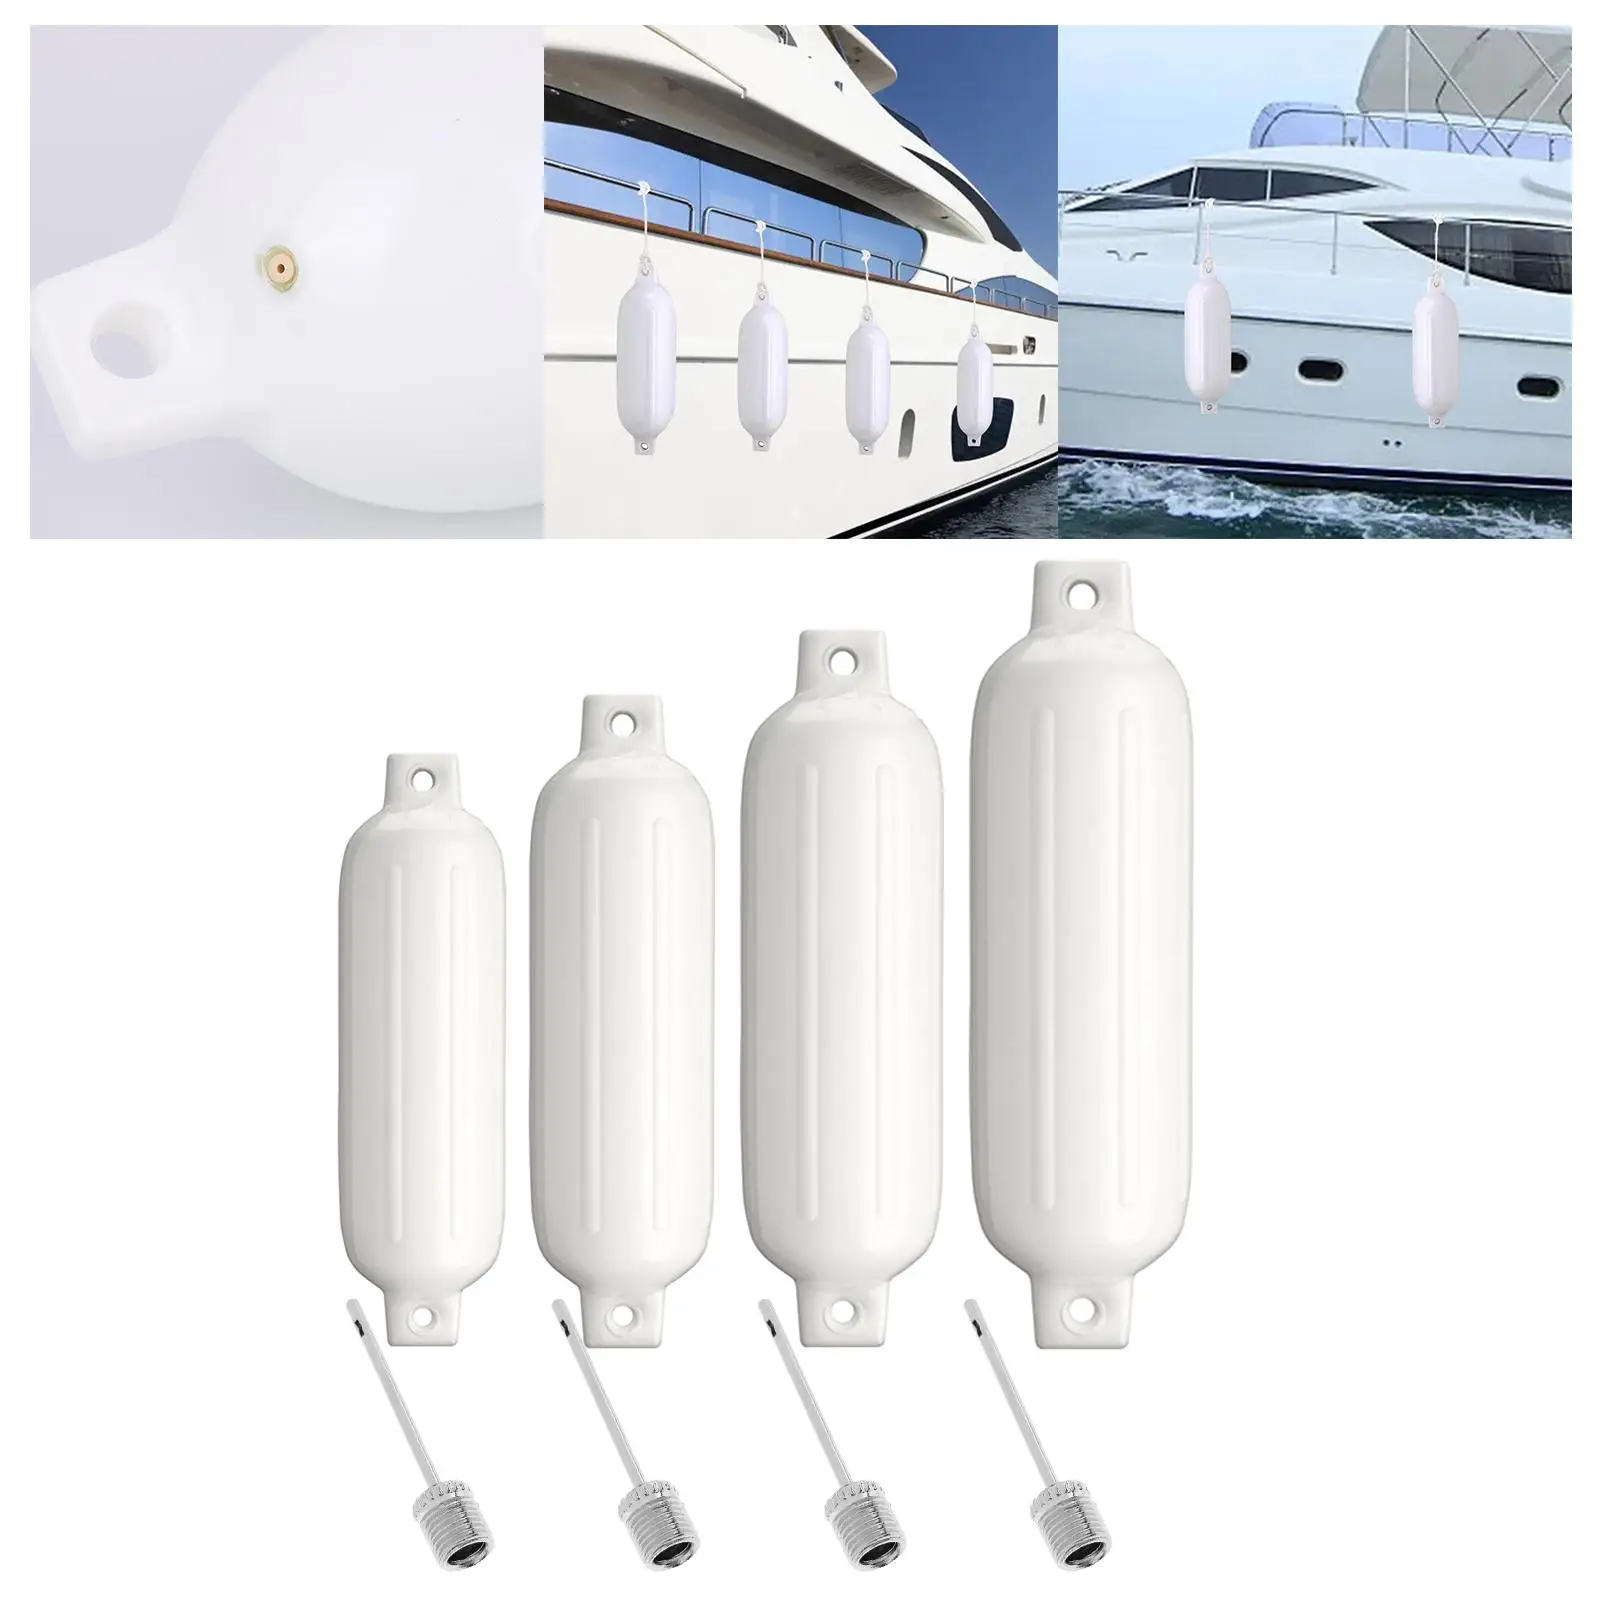 Boat Fender Floating Platform Boat Accessories Marine Boat Bumpers Fenders for Sport Boats Boat Pontoon Fishing Boats Yacht